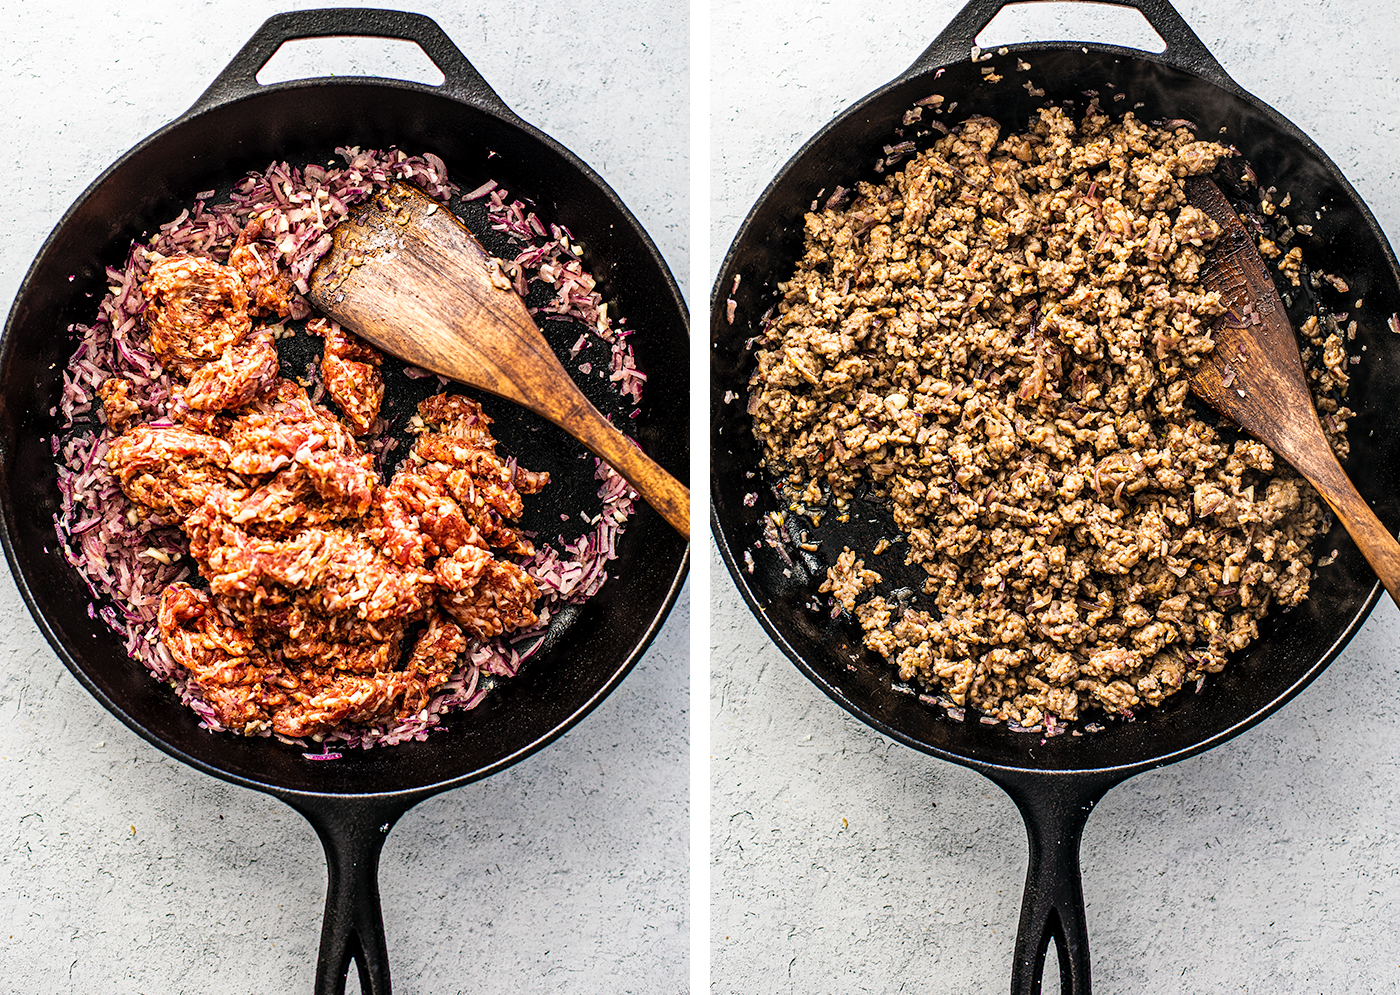 Side by side shots of skillet with ground sausage being cooked.